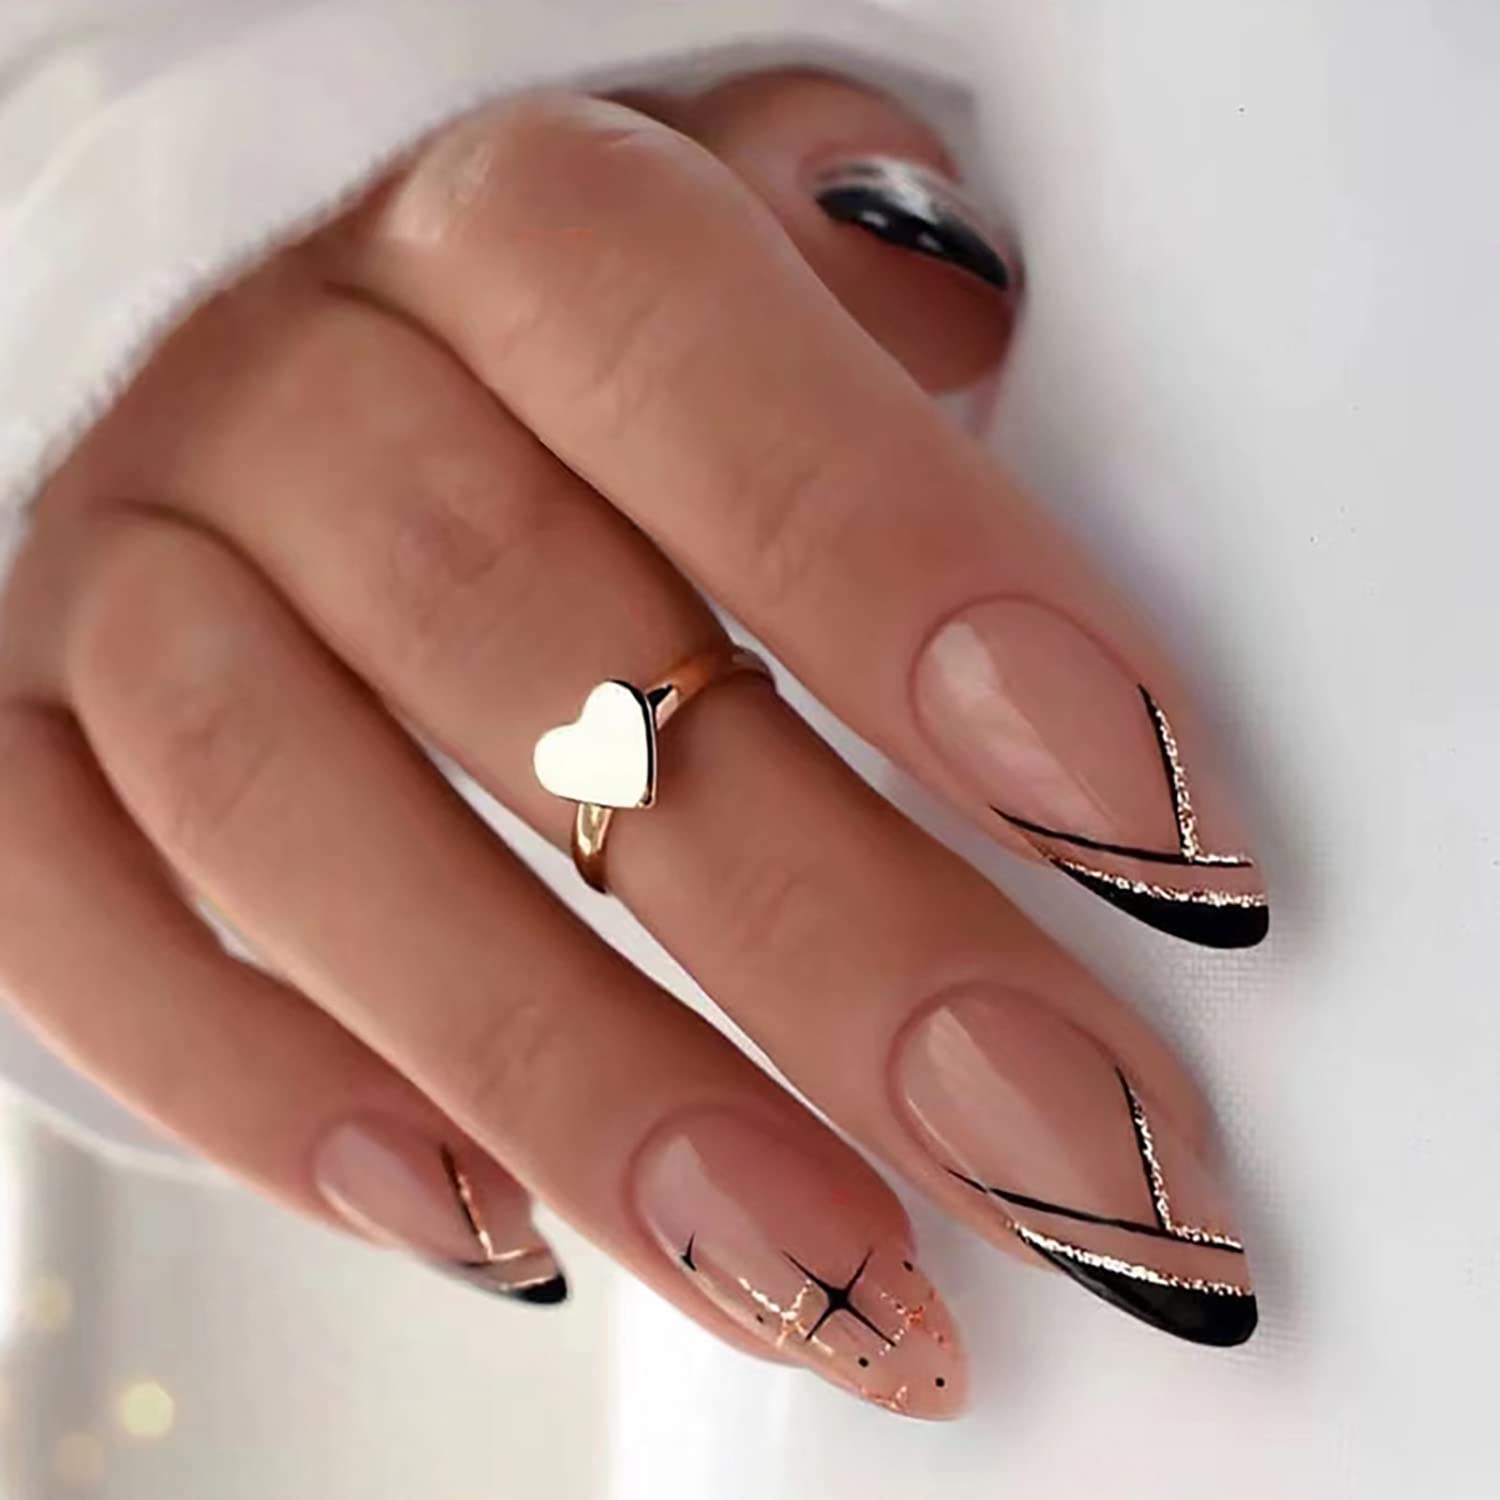 Premium Photo | Nude manicure gel polish on nails of milky color with a  design almond shaped nails